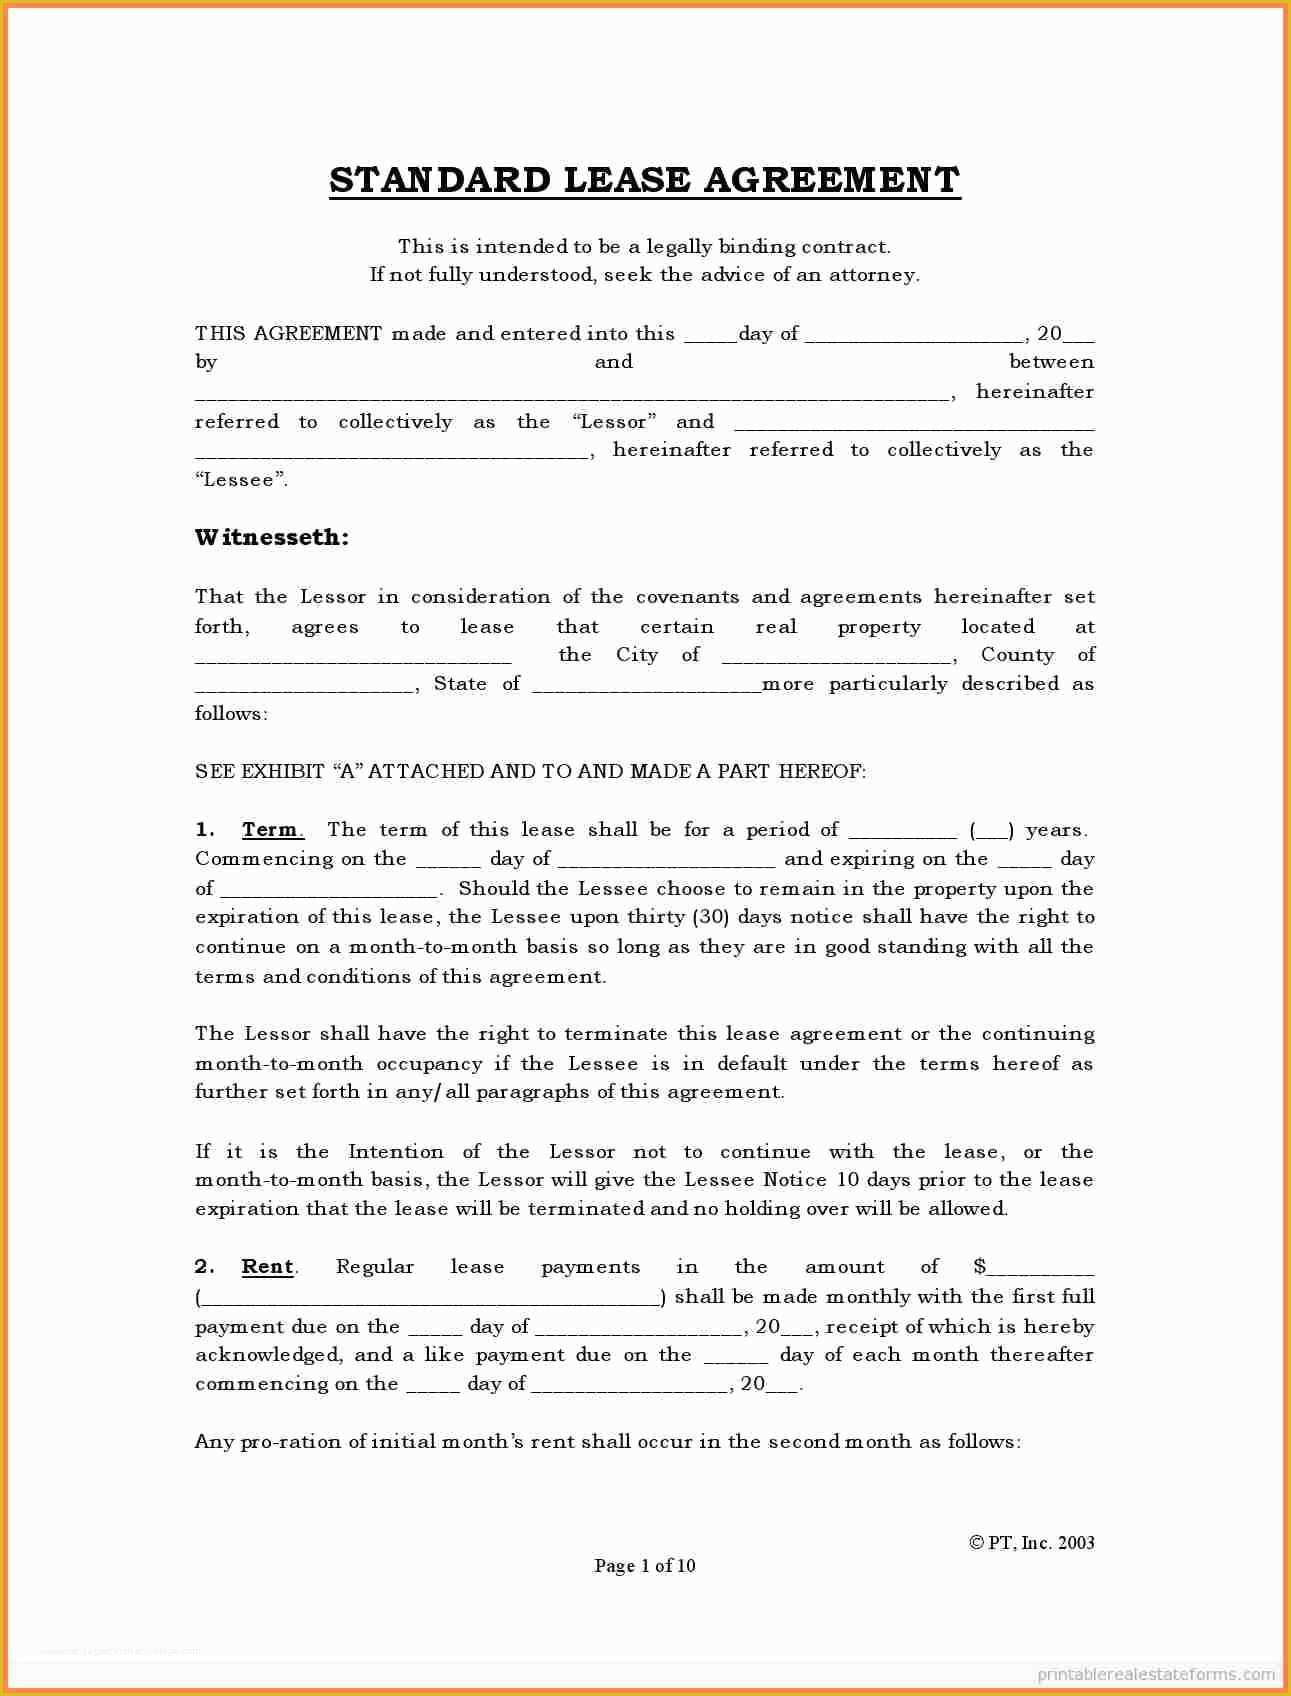 Building Lease Agreement Template Free Of Diy Mercial Lease Agreement Diy Do It Your Self